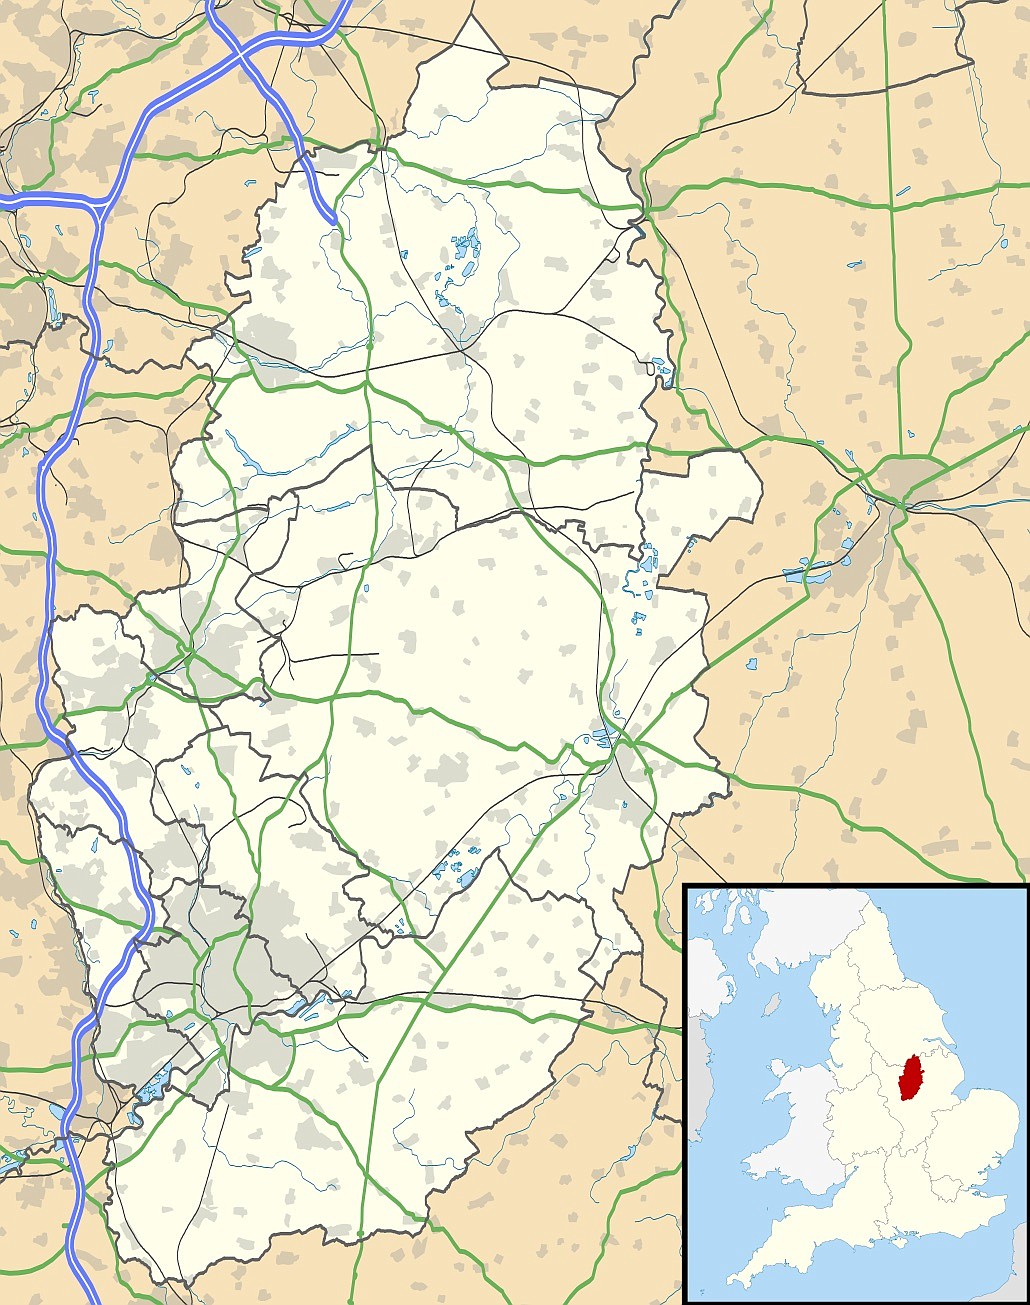 Nottinghamshire, location of Scrooby and Bawtry, home of the Pilgrims before they fled to Holland and later to America.